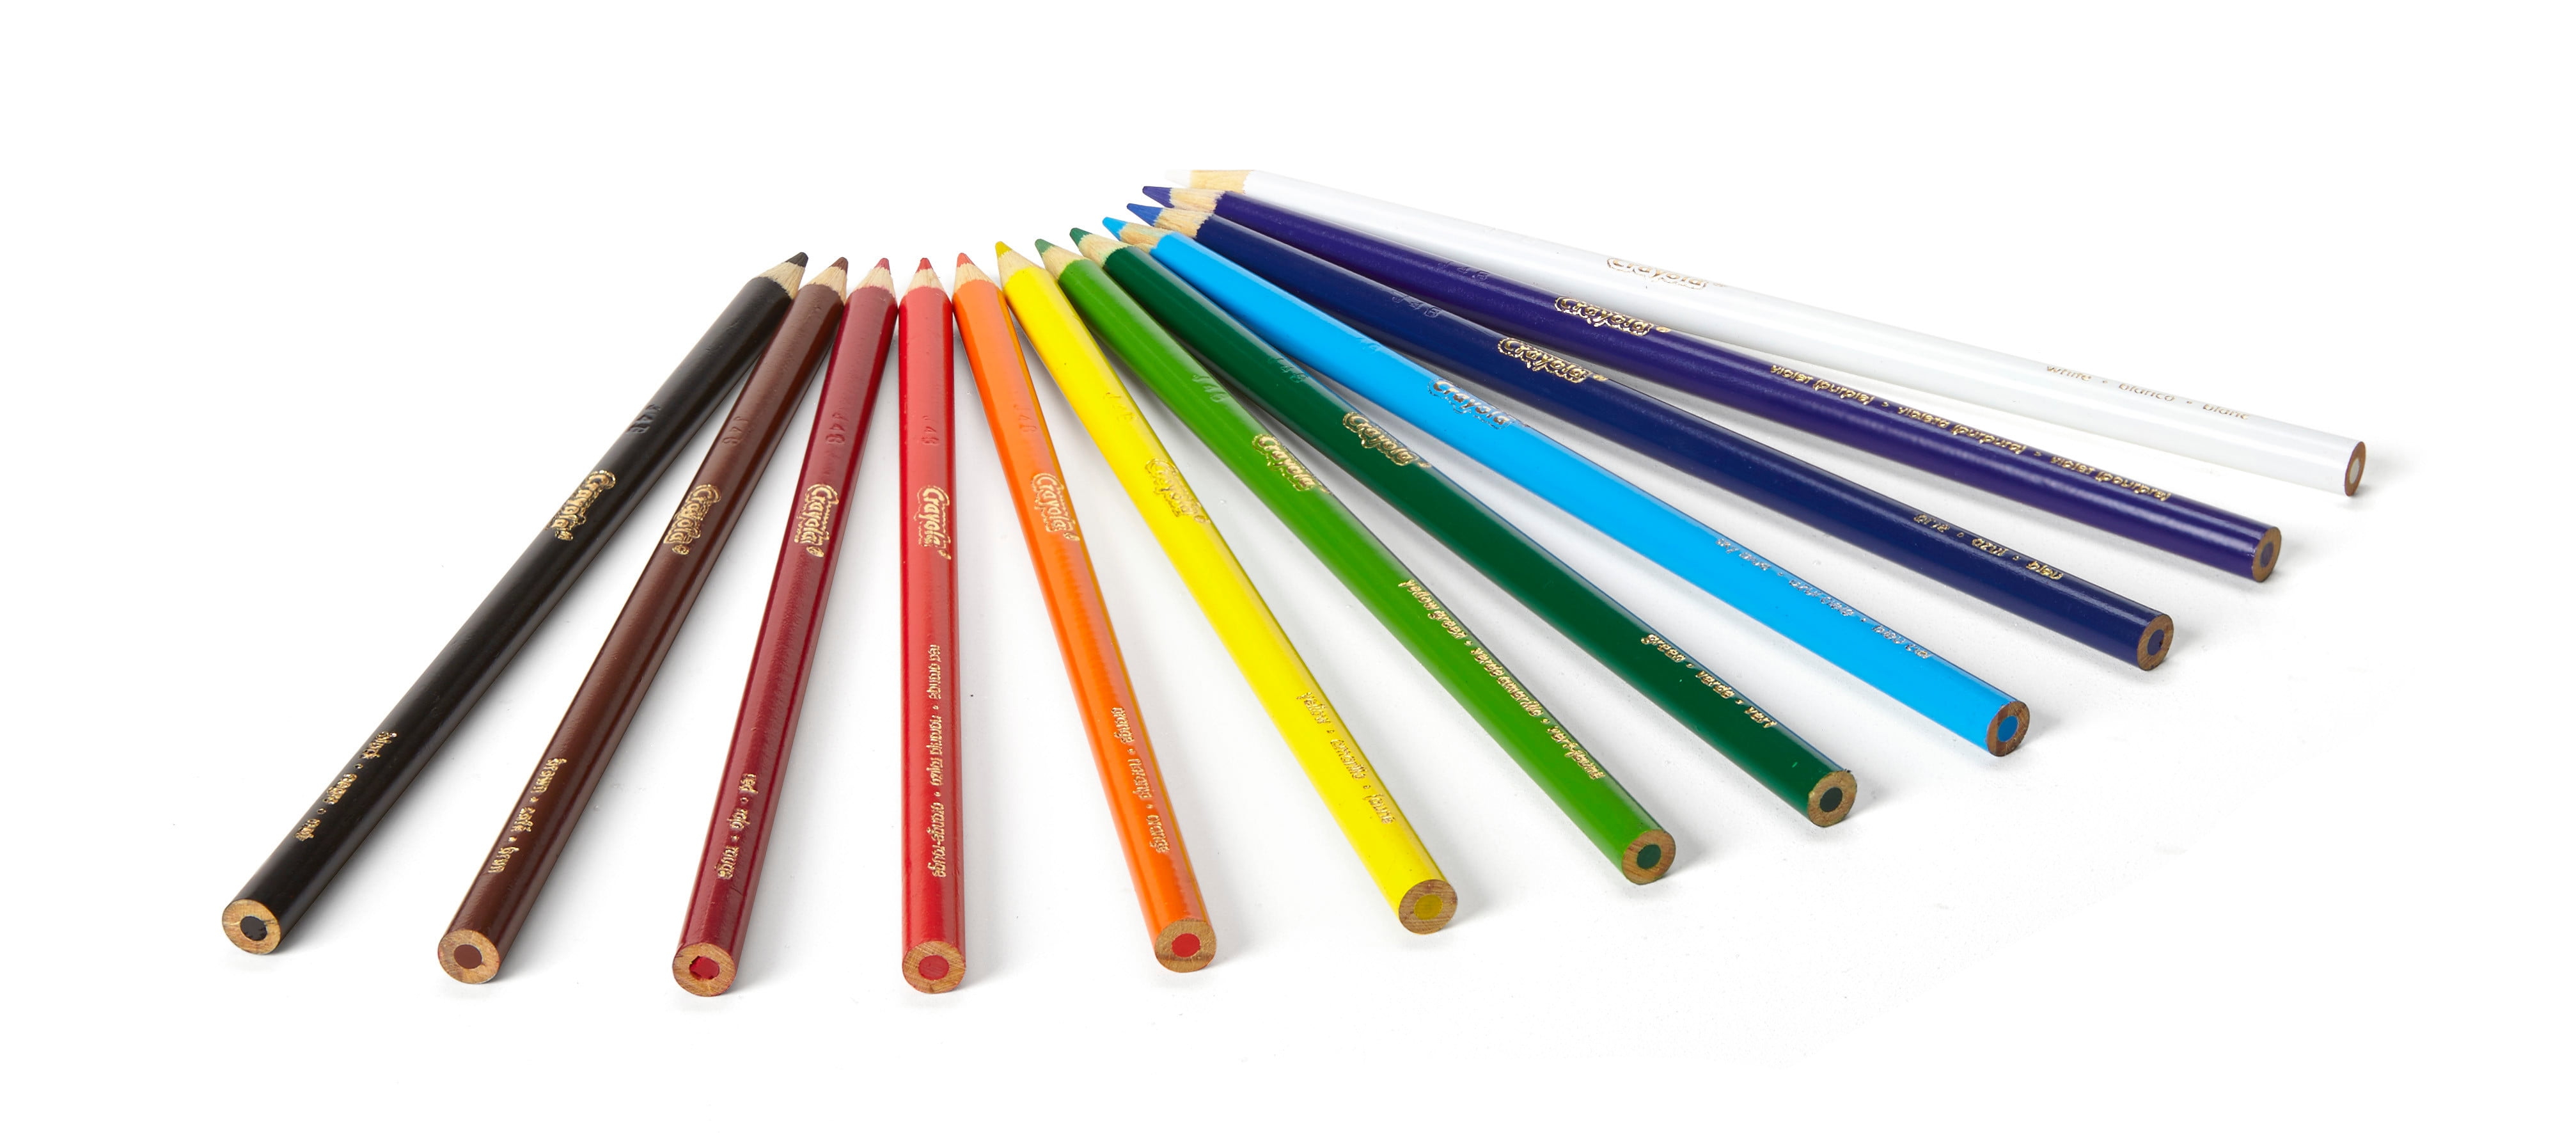 Rarlan Colored Pencils Bulk, Pre-Sharpened Colored Pencils for Kids, 12 Assorted Colors, Pack of 36, Coloring Pencils 432 Count